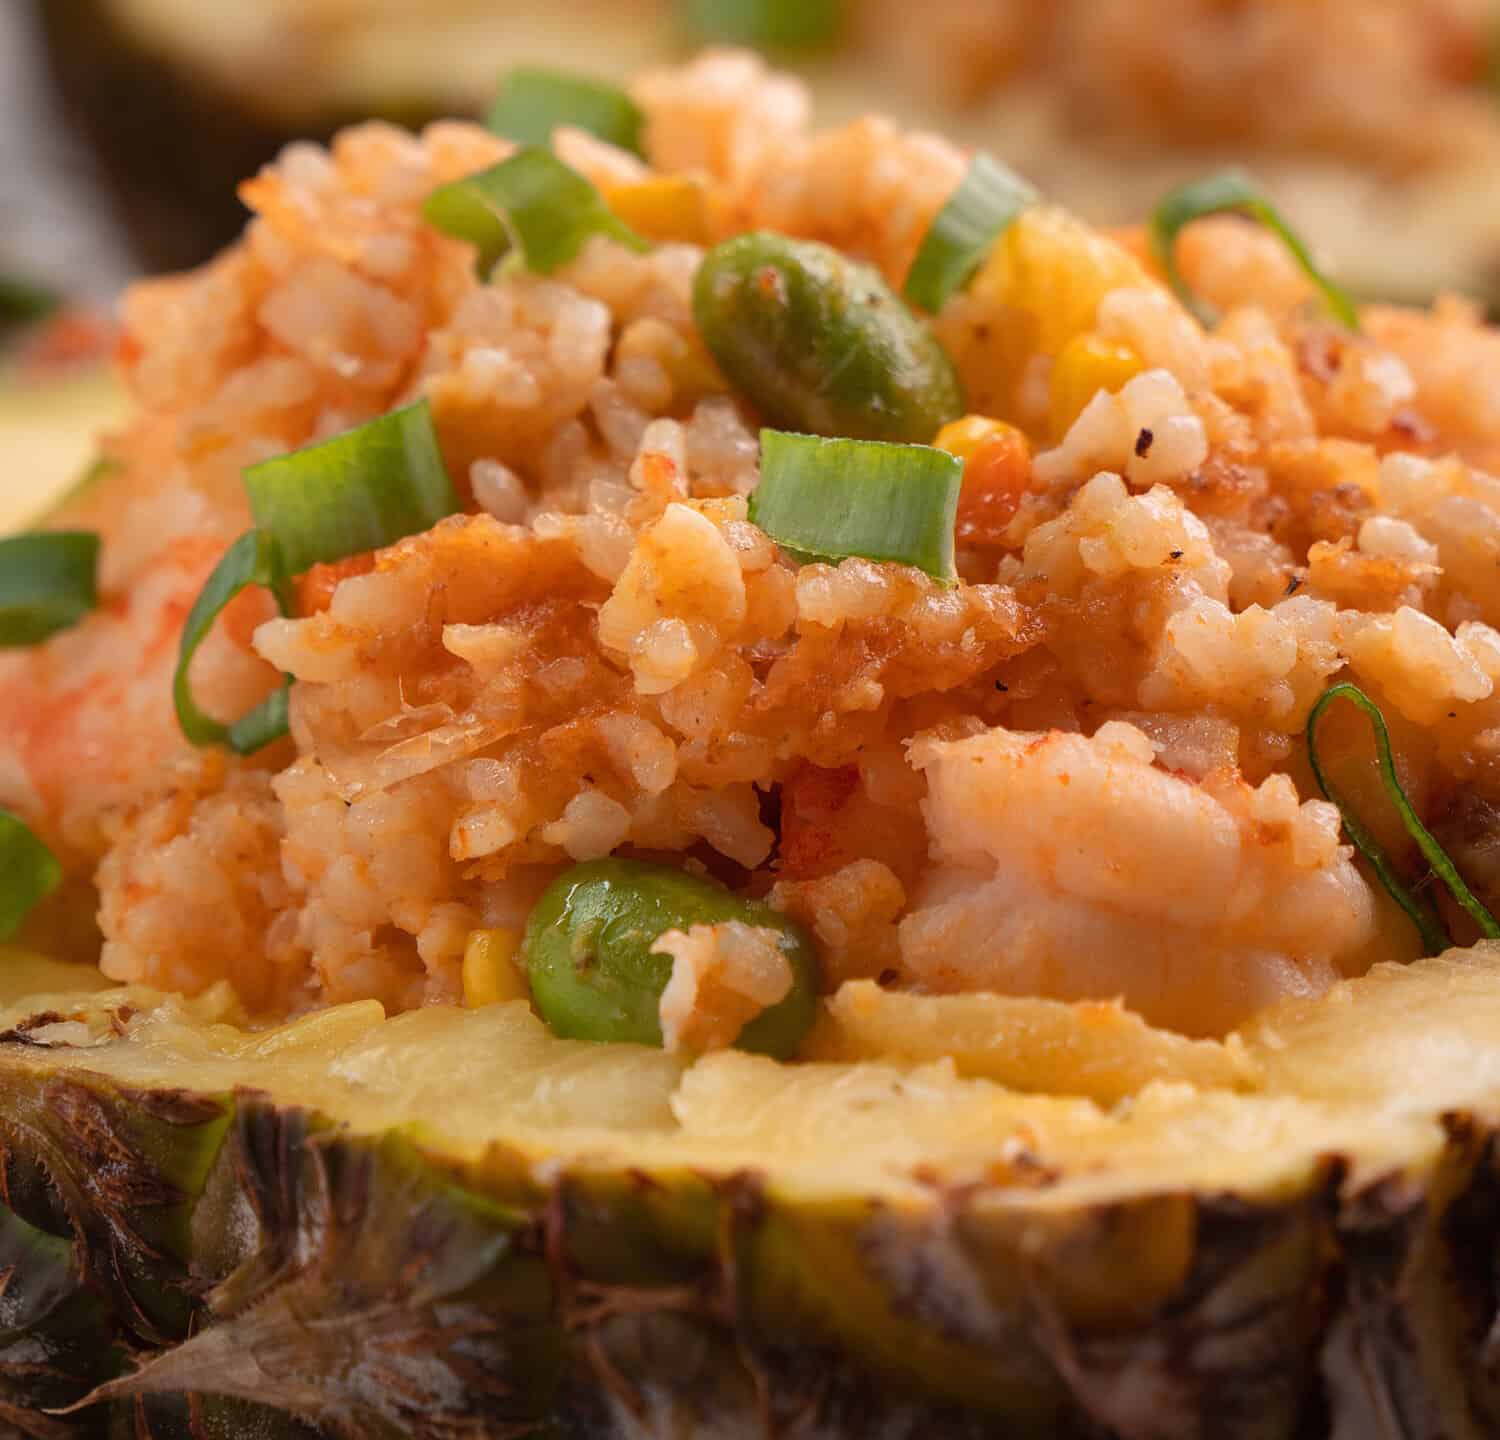 Delicious carved pineapple served as a bowl container boat stuffed with fresh pineapple tomato sauced seafood fried rice.